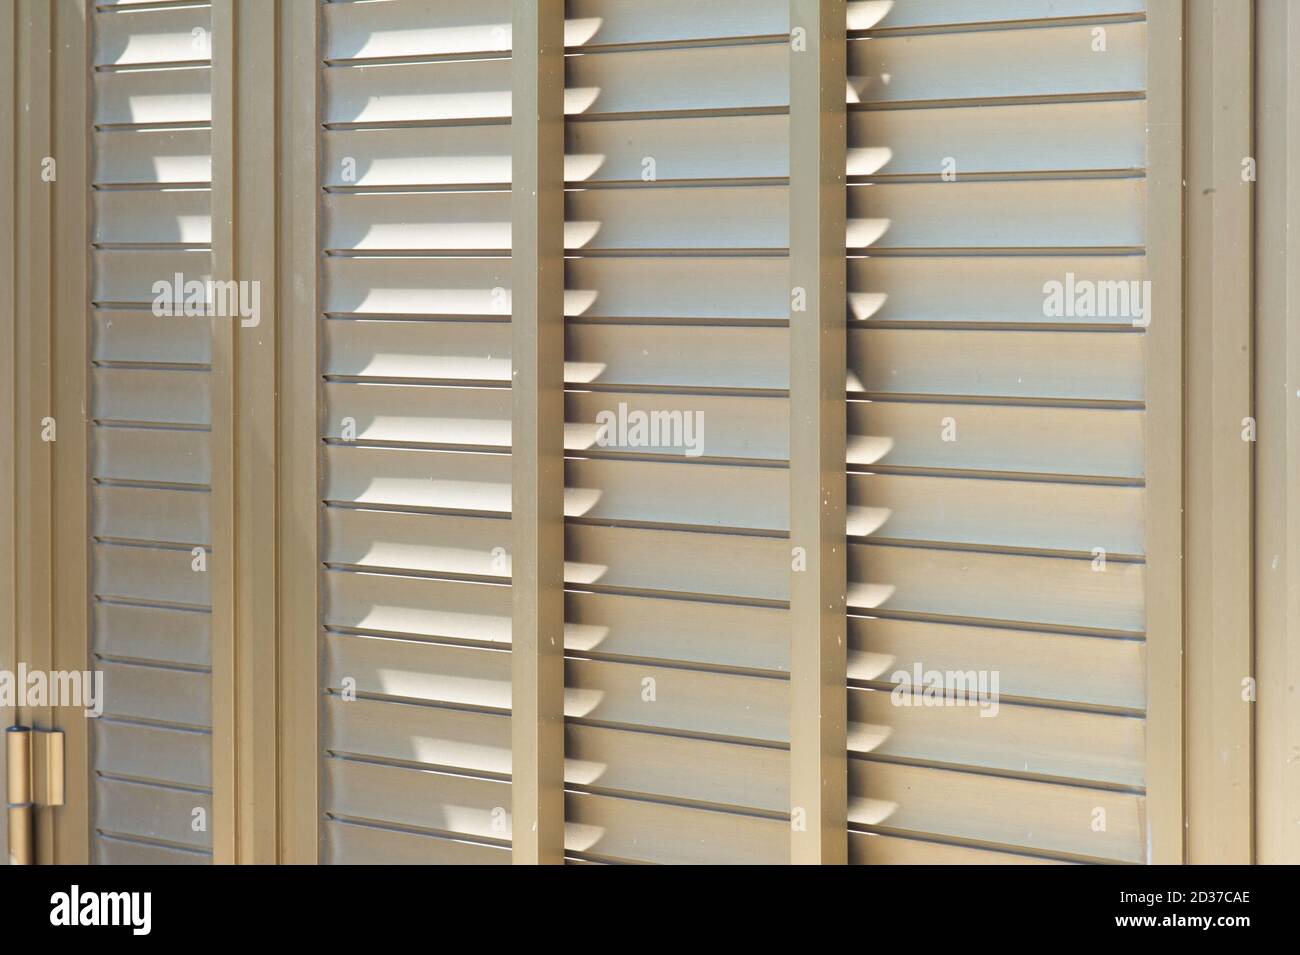 Closed gold-colored metallic shutters, metal blinds with hinge Stock Photo